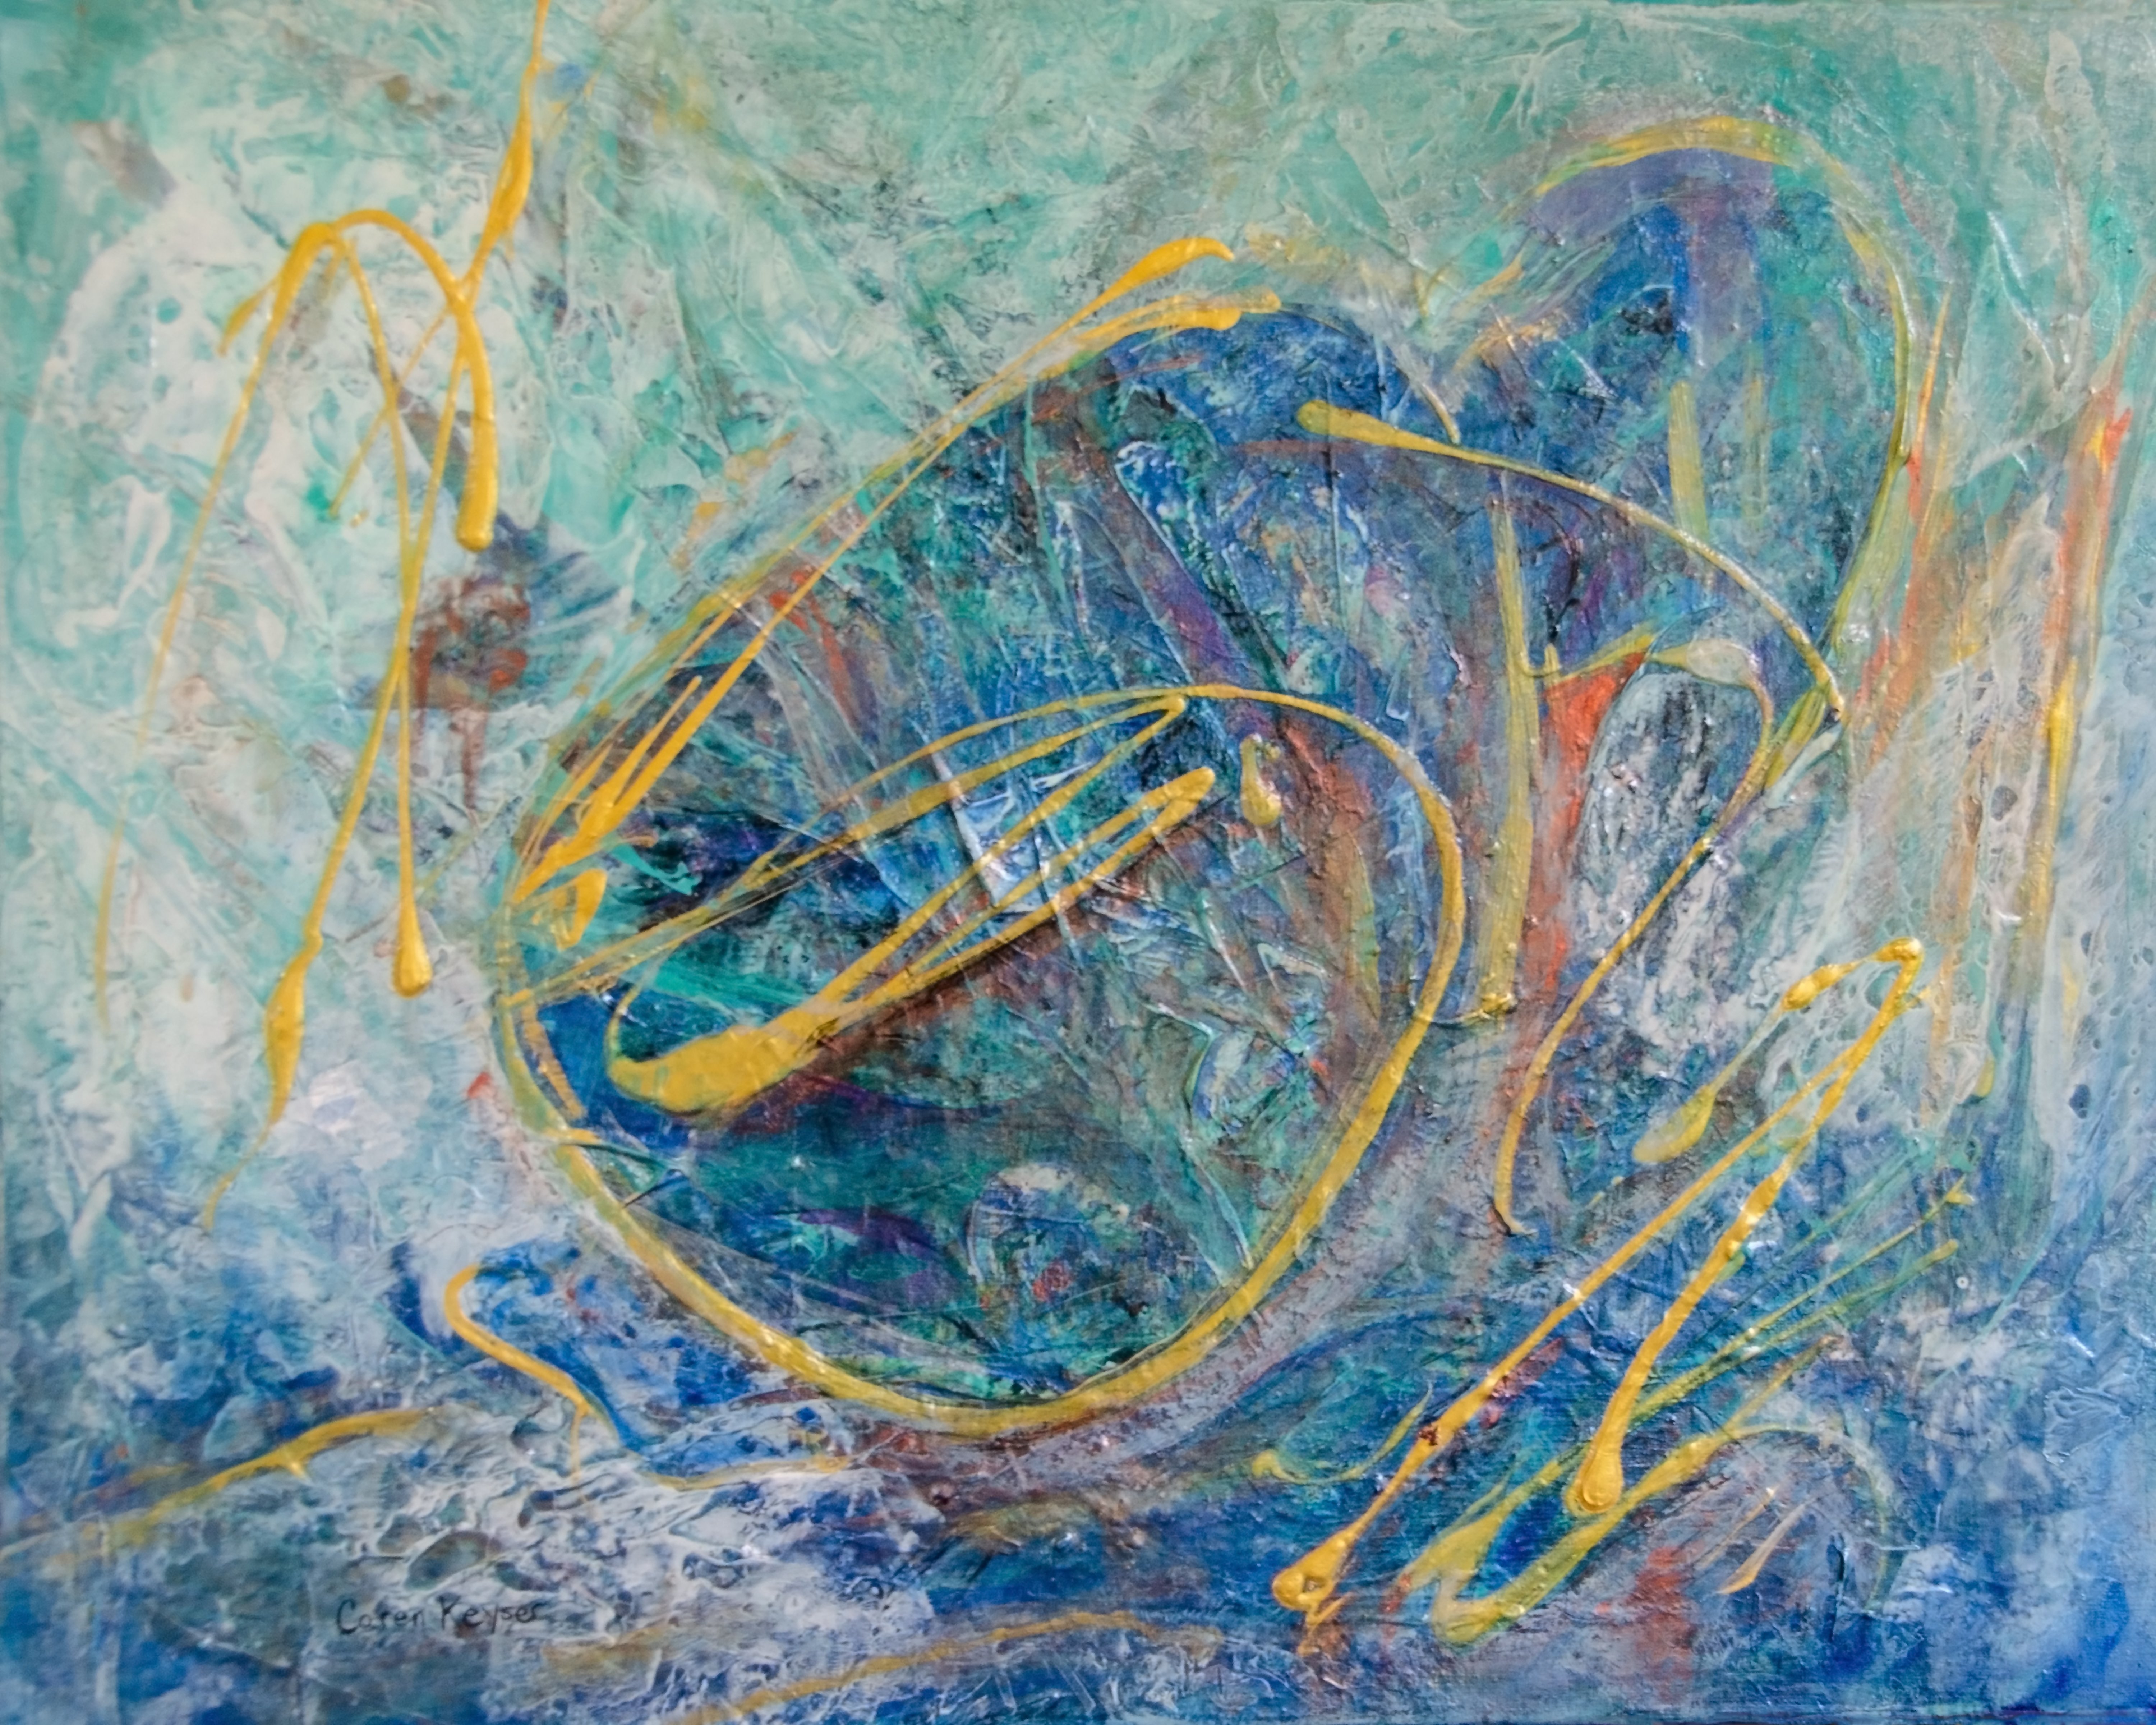 Caren Keyser; Blue Crouch, 2019, Original Painting Acrylic, 20 x 16 inches. Artwork description: 241 Metallic paints make this painting sing.  The figure is drawn in gold over shimmering blues. ...